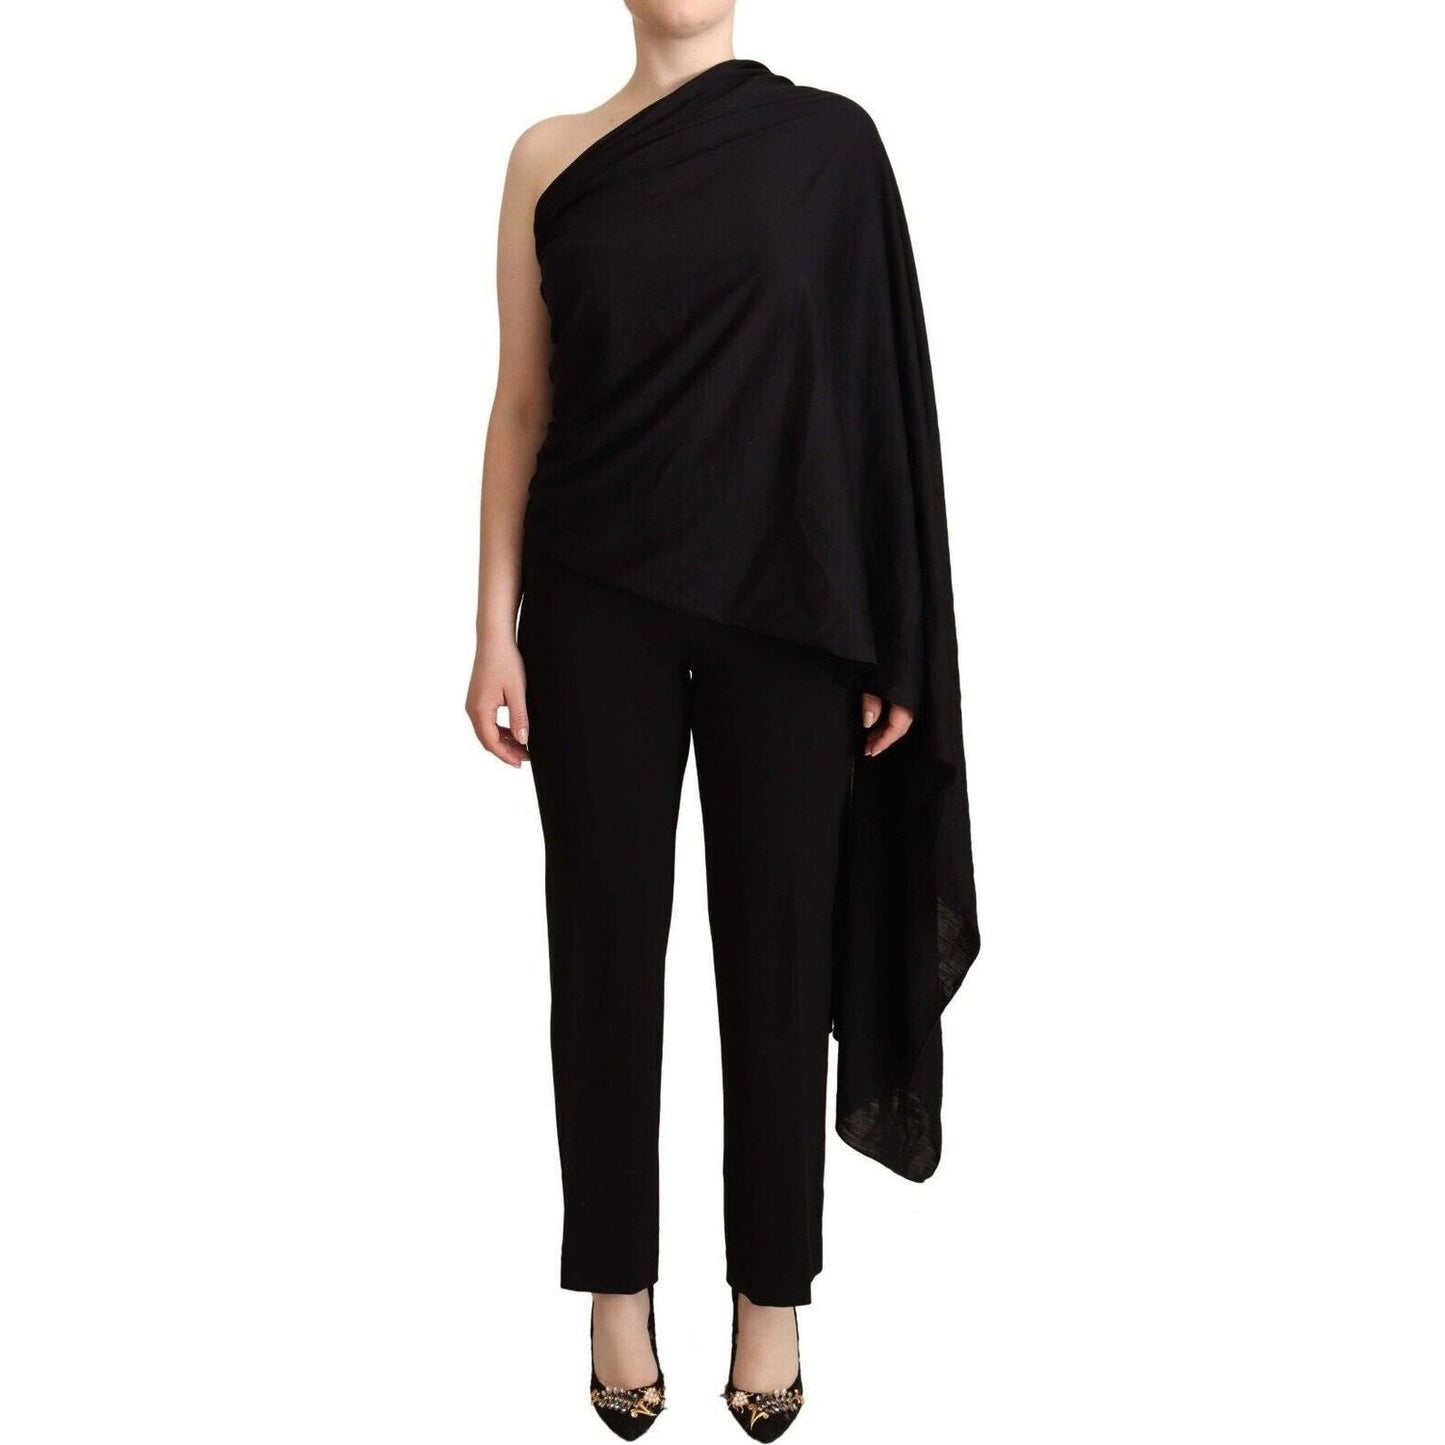 Dolce & Gabbana Elegant One-Shoulder Wool Top WOMAN TOPS AND SHIRTS black-wool-knit-one-shoulder-long-sleeves-top